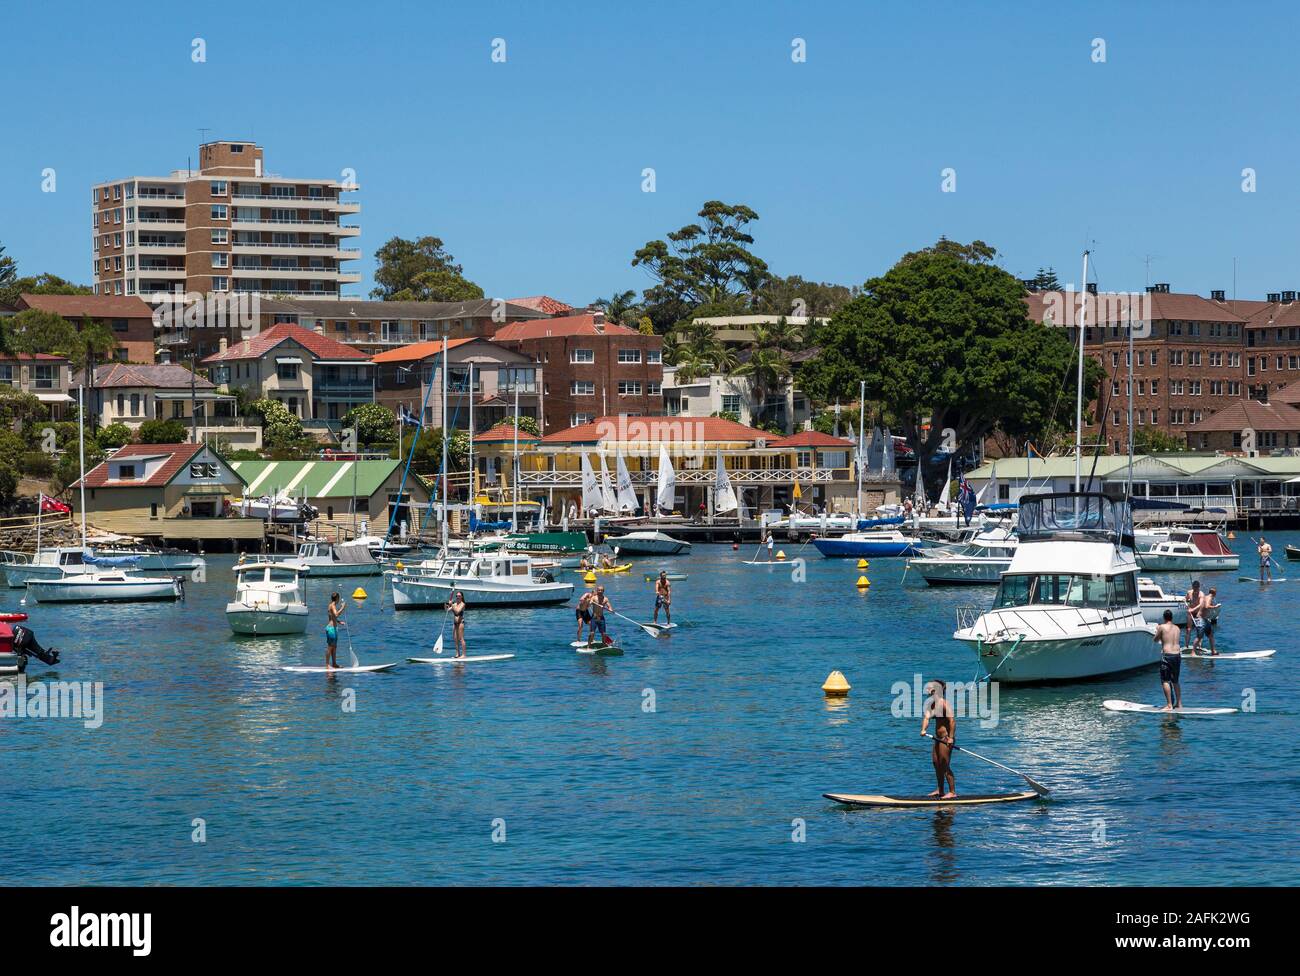 Paddle boarding, Manly Harbour, Sydney, NSW, Australia Foto Stock